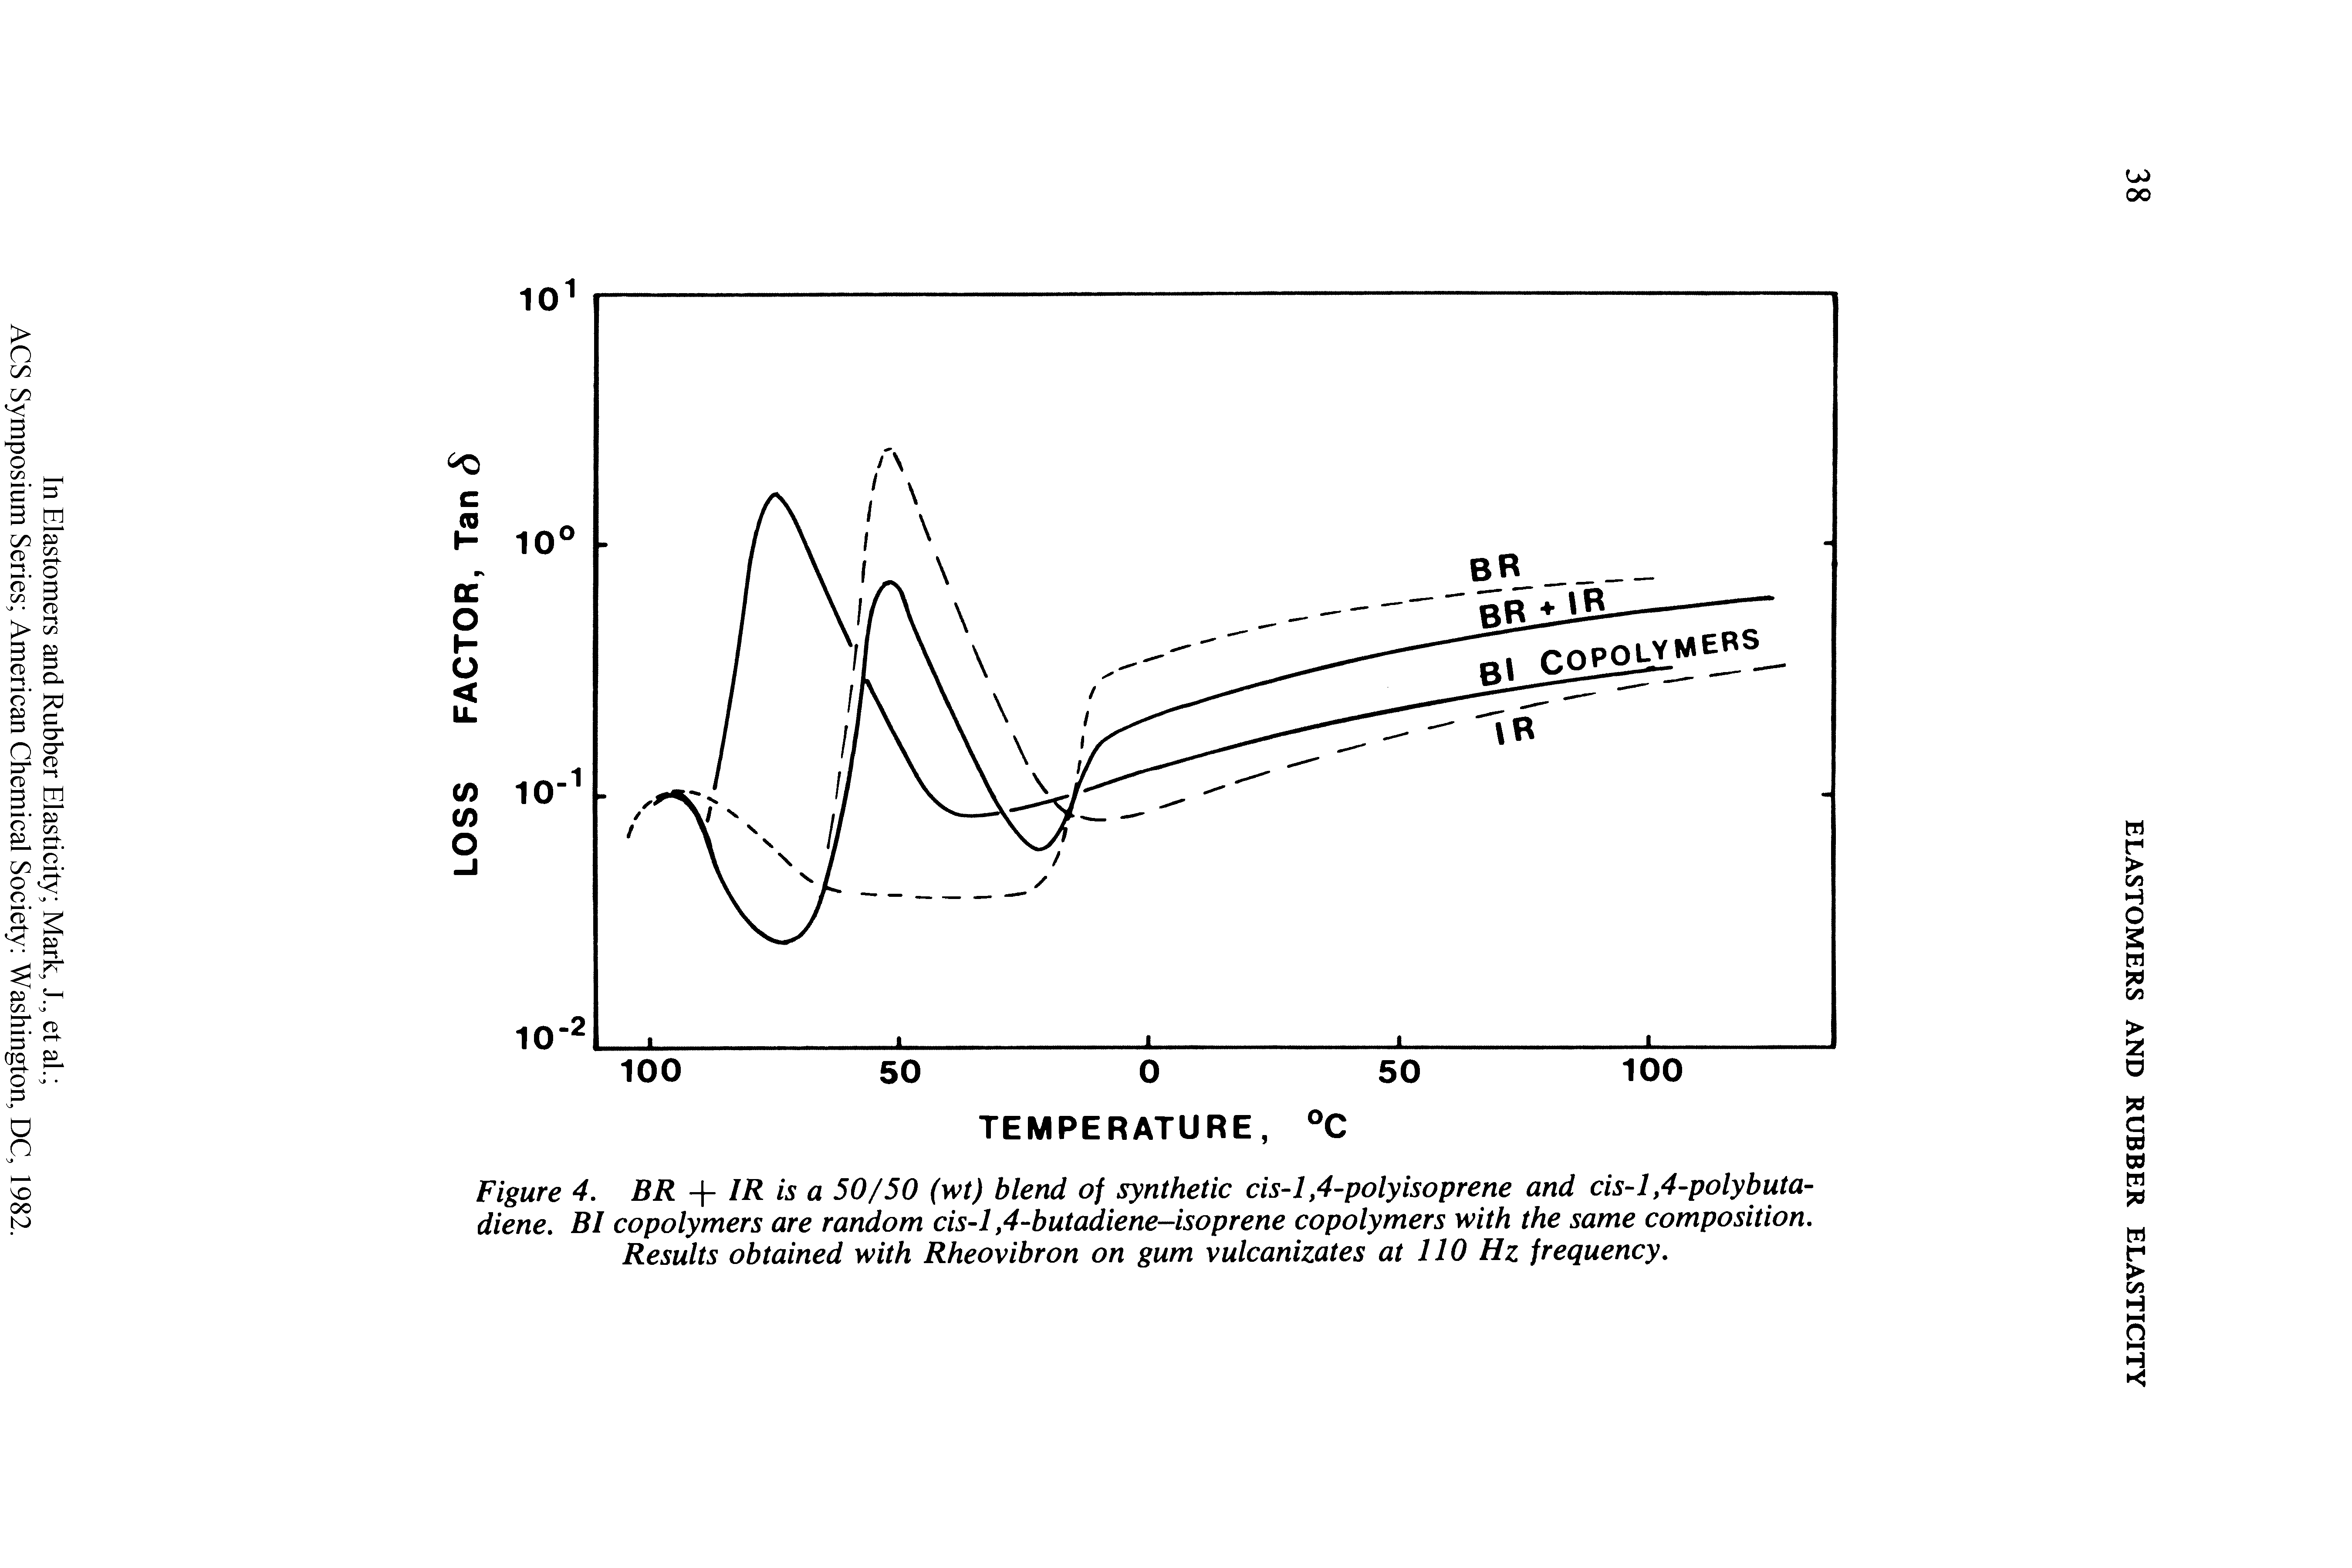 Figure 4. BR + IR is a 50/50 (wt) blend of synthetic cis-1,4-polyisoprene and cis-1,4-polybutadiene. Bl copolymers are random cis-1,4-butadiene-isoprene copolymers with the same composition. Results obtained with Rheovibron on gum vulcanizates at 110 Hz frequency.